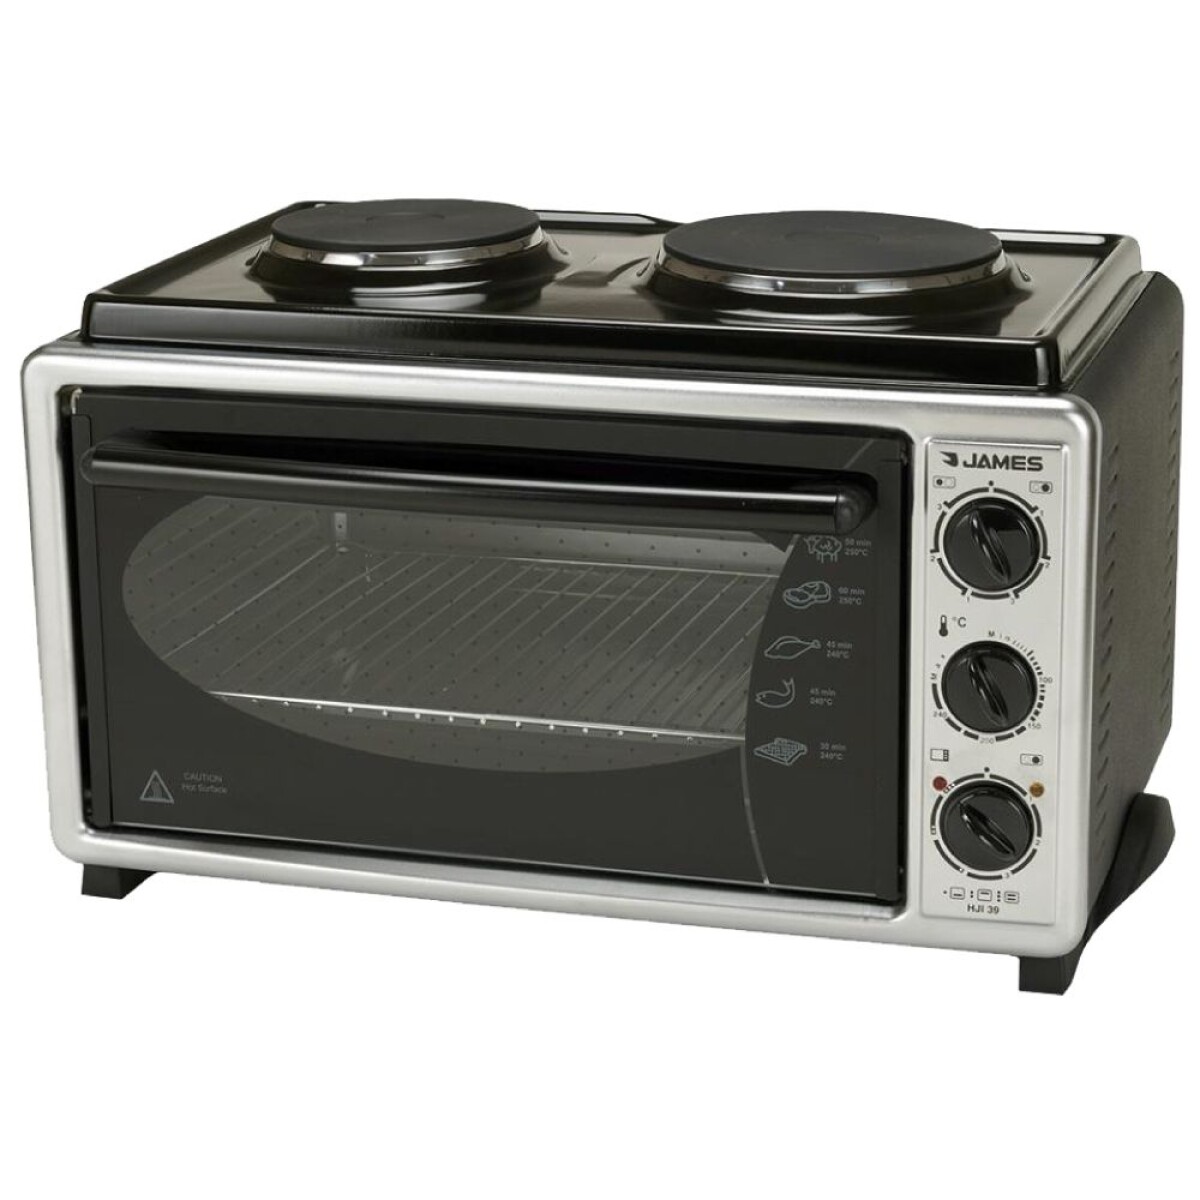 HORNO ELECTRICO MOD.HJTI39LTS - INOX.2 PLA OUTLET 